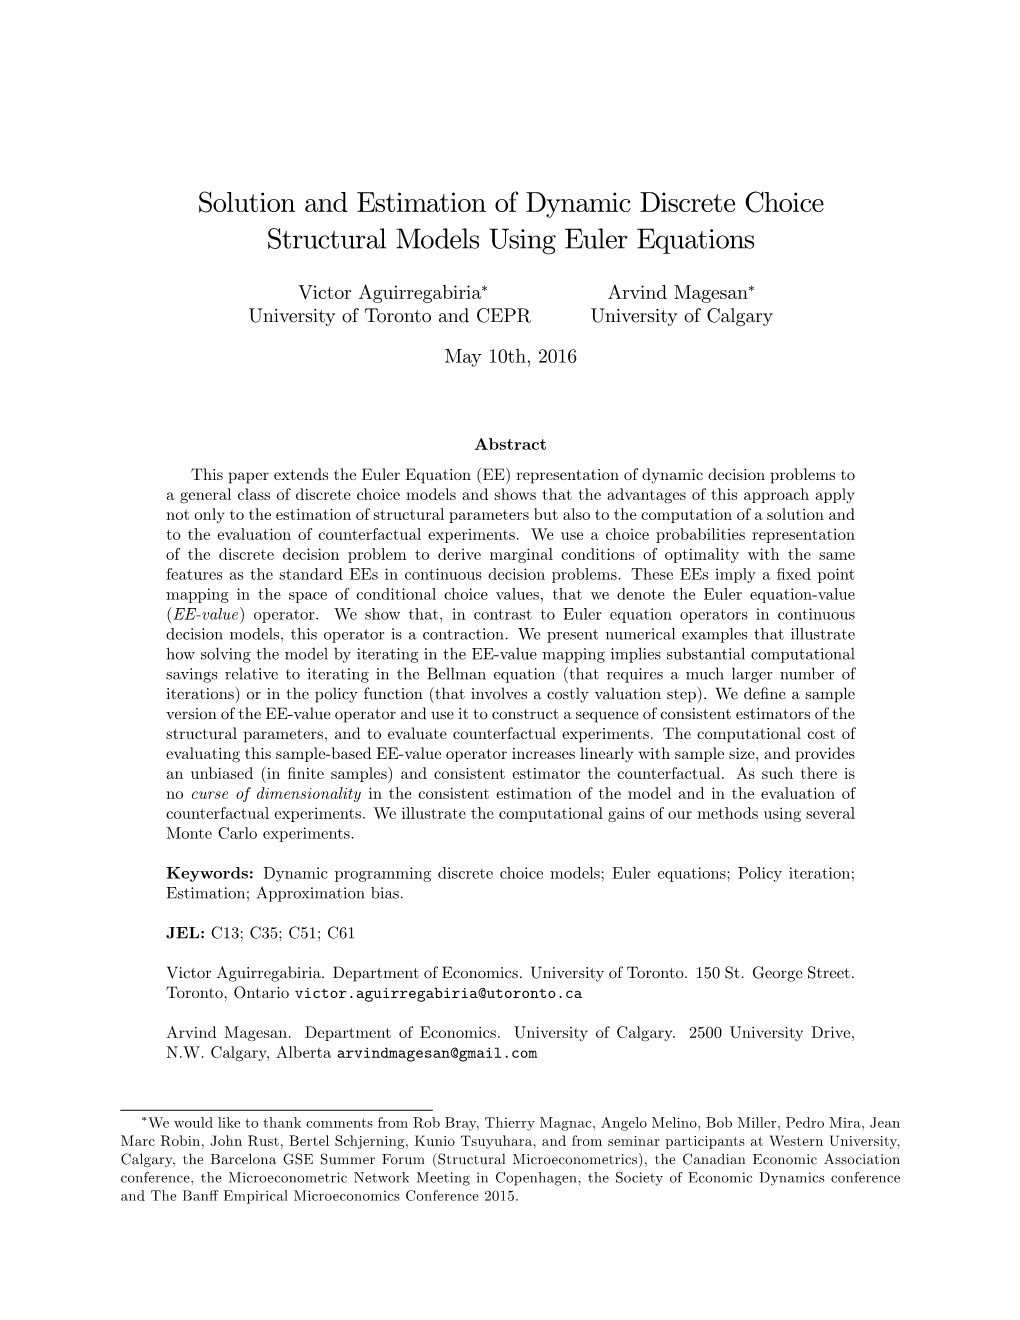 Solution and Estimation of Dynamic Discrete Choice Structural Models Using Euler Equations